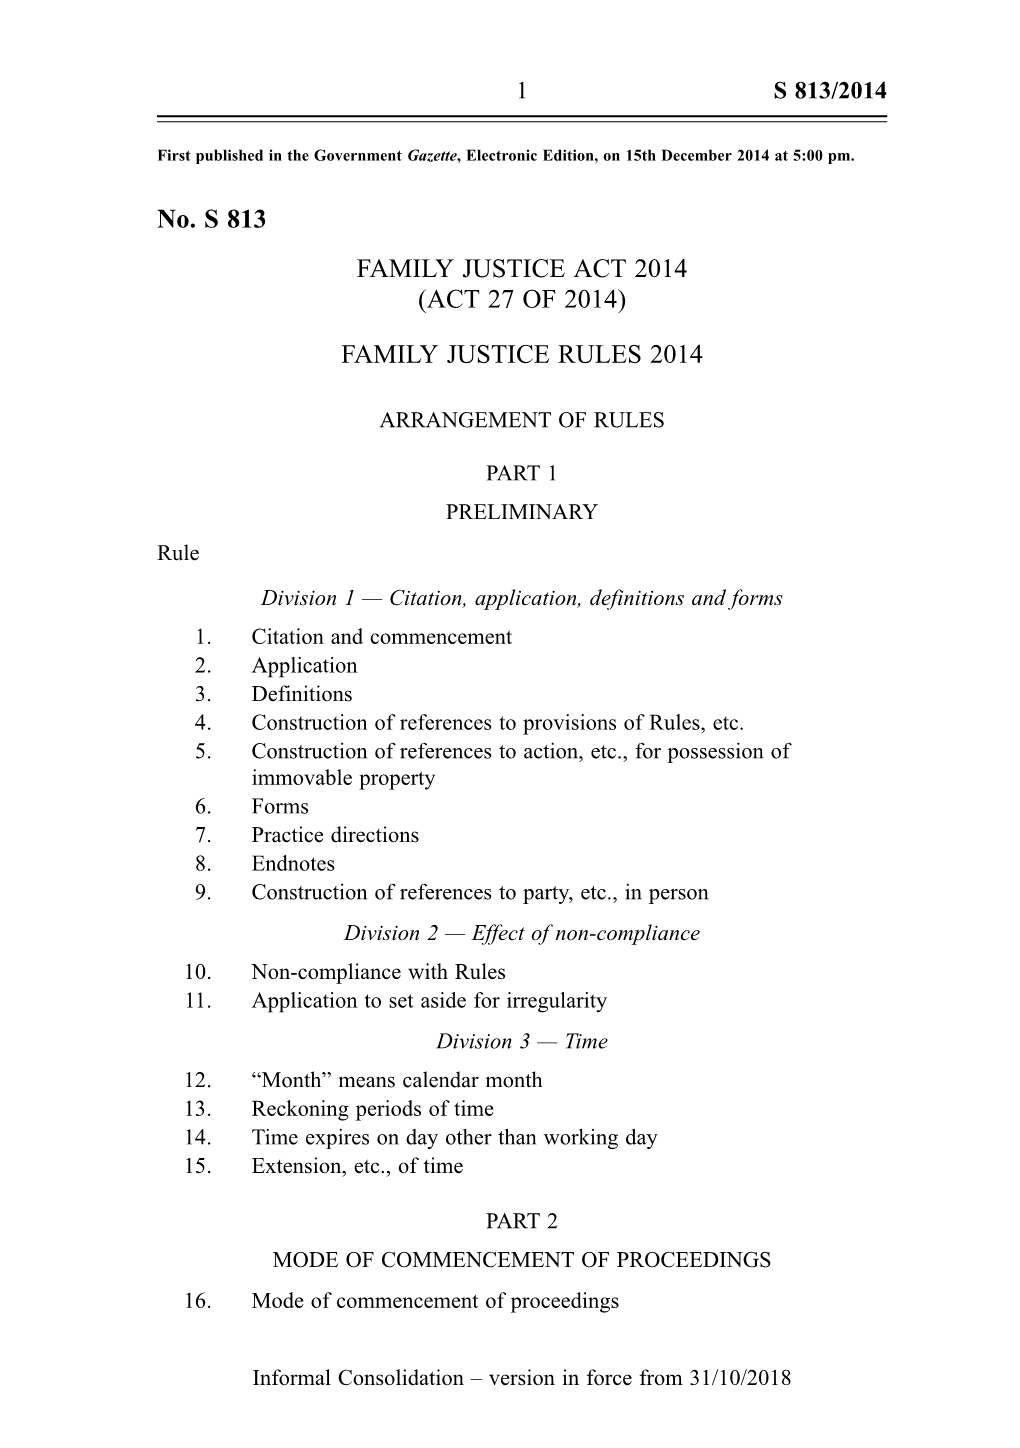 Family Justice Rules 2014